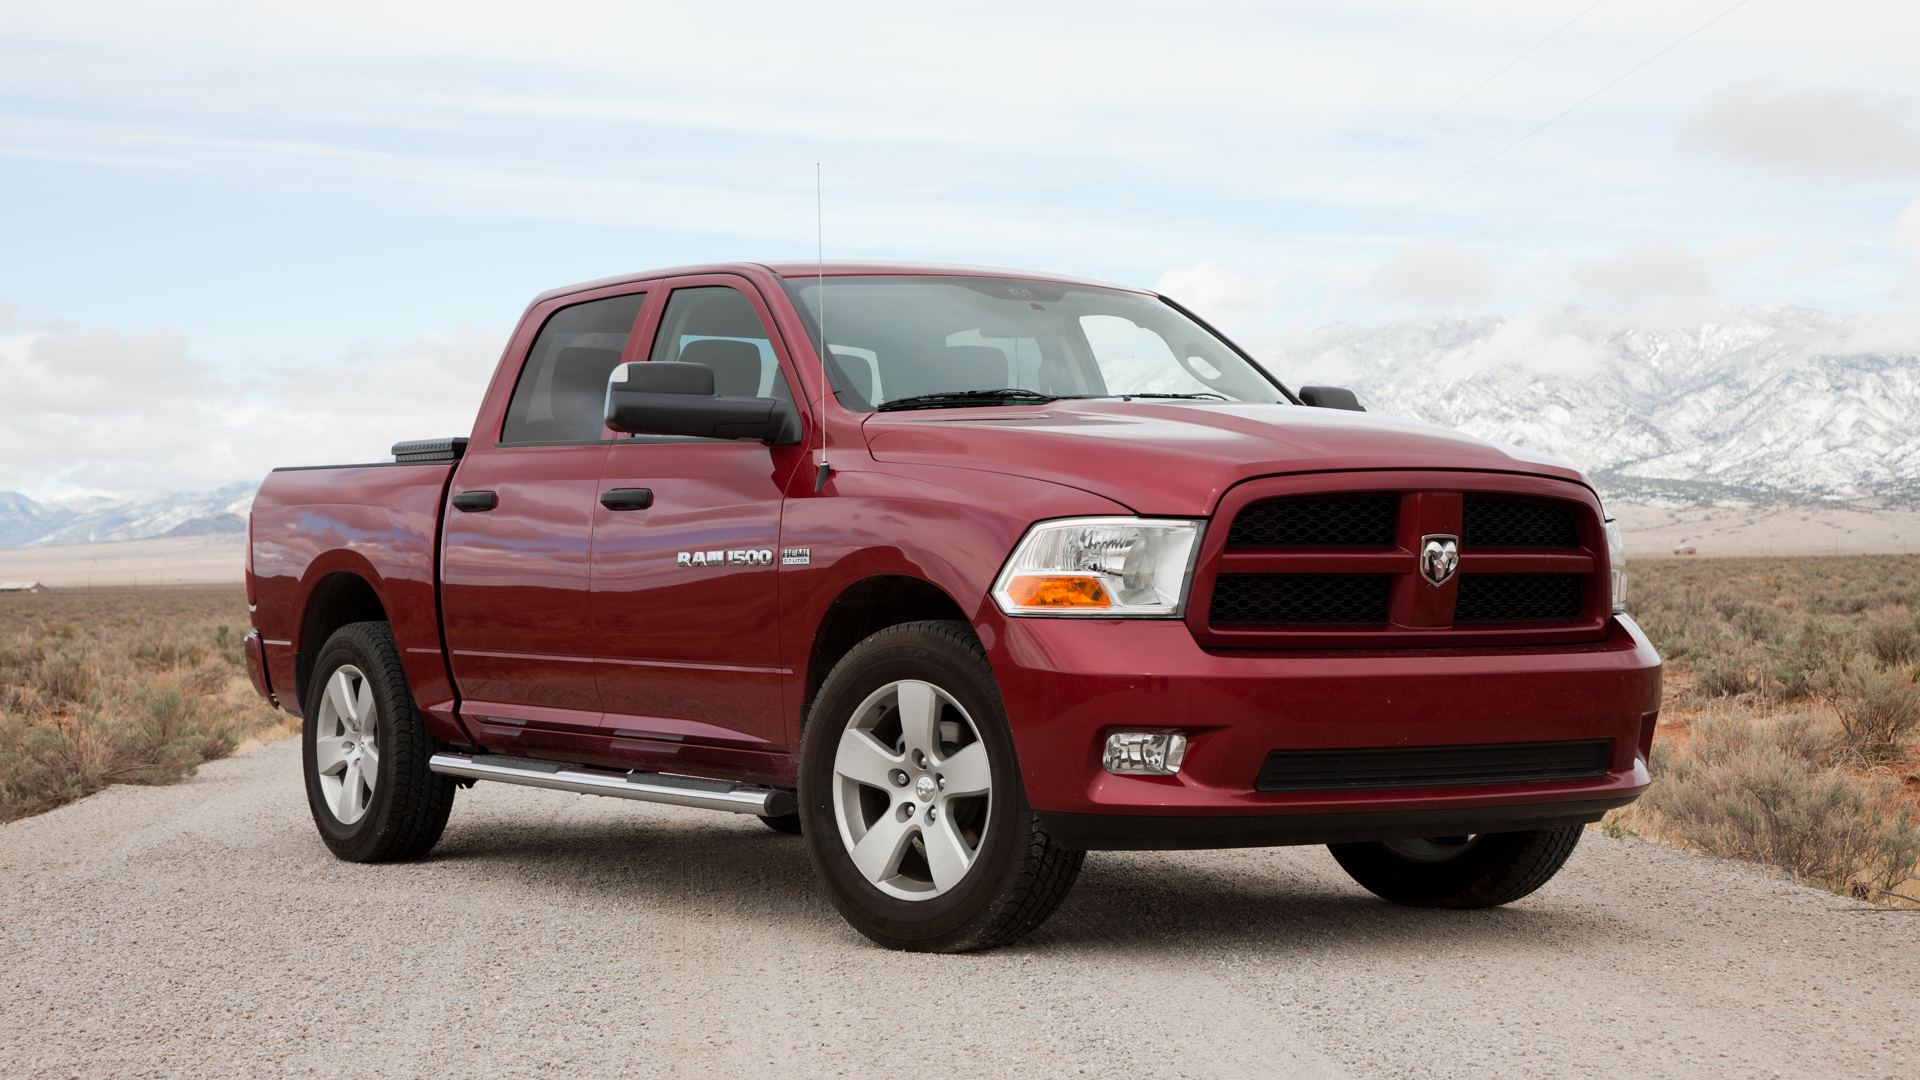 <ul> <li><strong>10-year cost to maintain:</strong> $13,300</li> </ul> <p>Dodge has been producing trucks since 1917. It wasn't until 1981, however, that the now-famous Ram entered the scene. In 1994, the game changed, even more, when the company developed a rugged half-ton pickup called the 1500. Still wildly popular, the 1500 comes with a maintenance price tag significantly higher than the brand average of $10,600 over 10 years.</p>